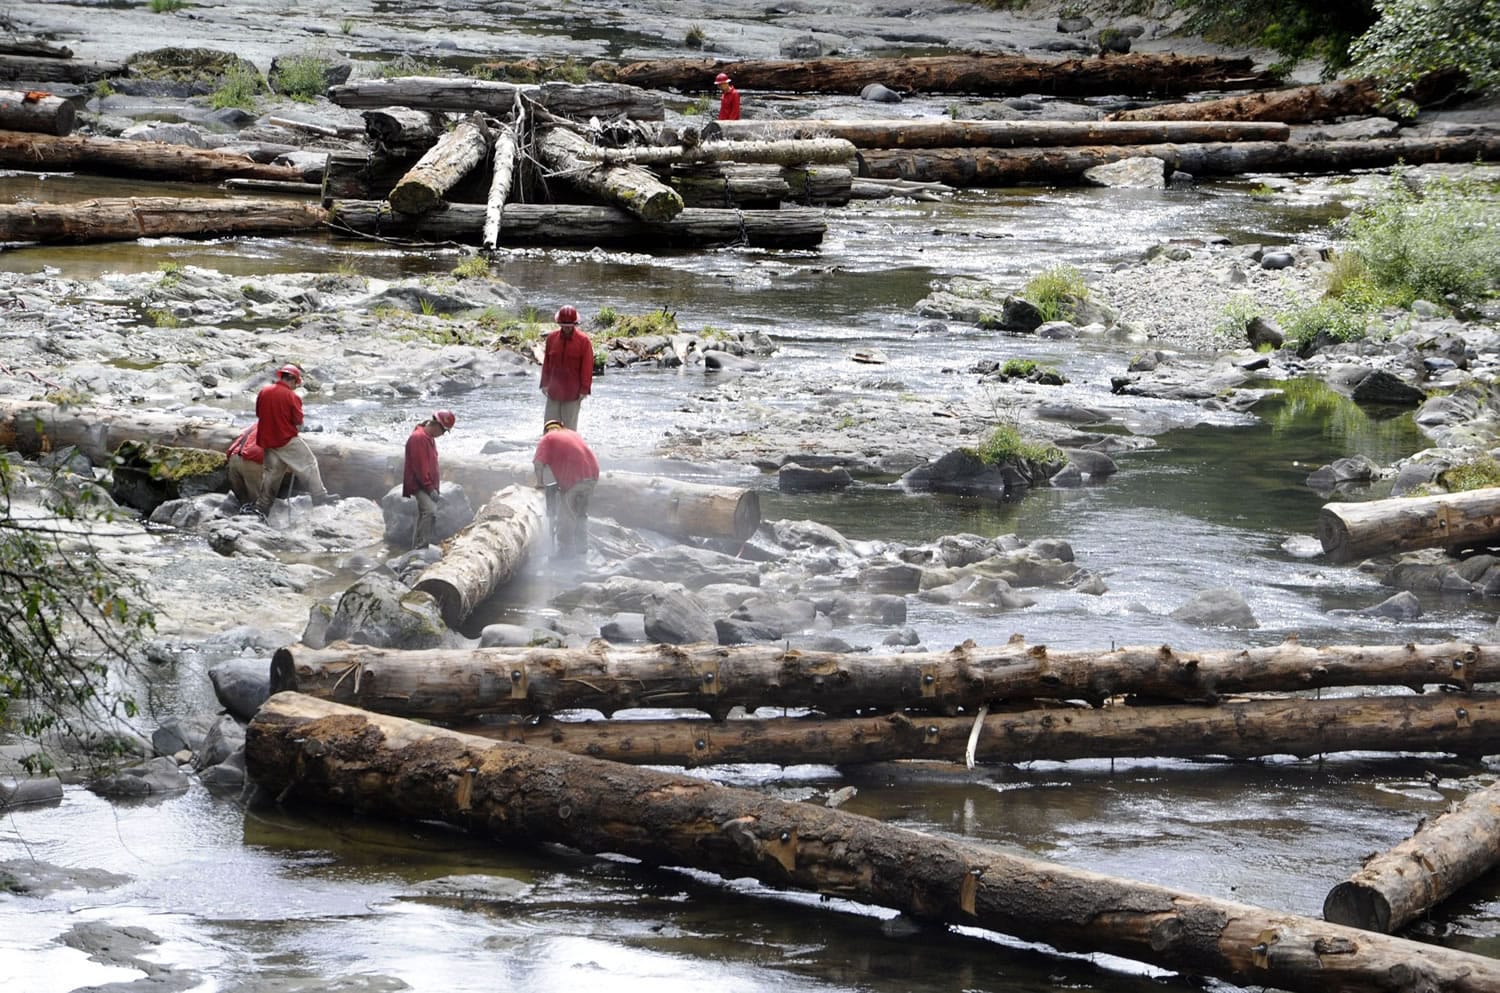 The Lower Columbia Fish Enhancement Group has anchored nearly 160 logs along the Upper Washougal River this year in an effort to restore natural fish habitat.